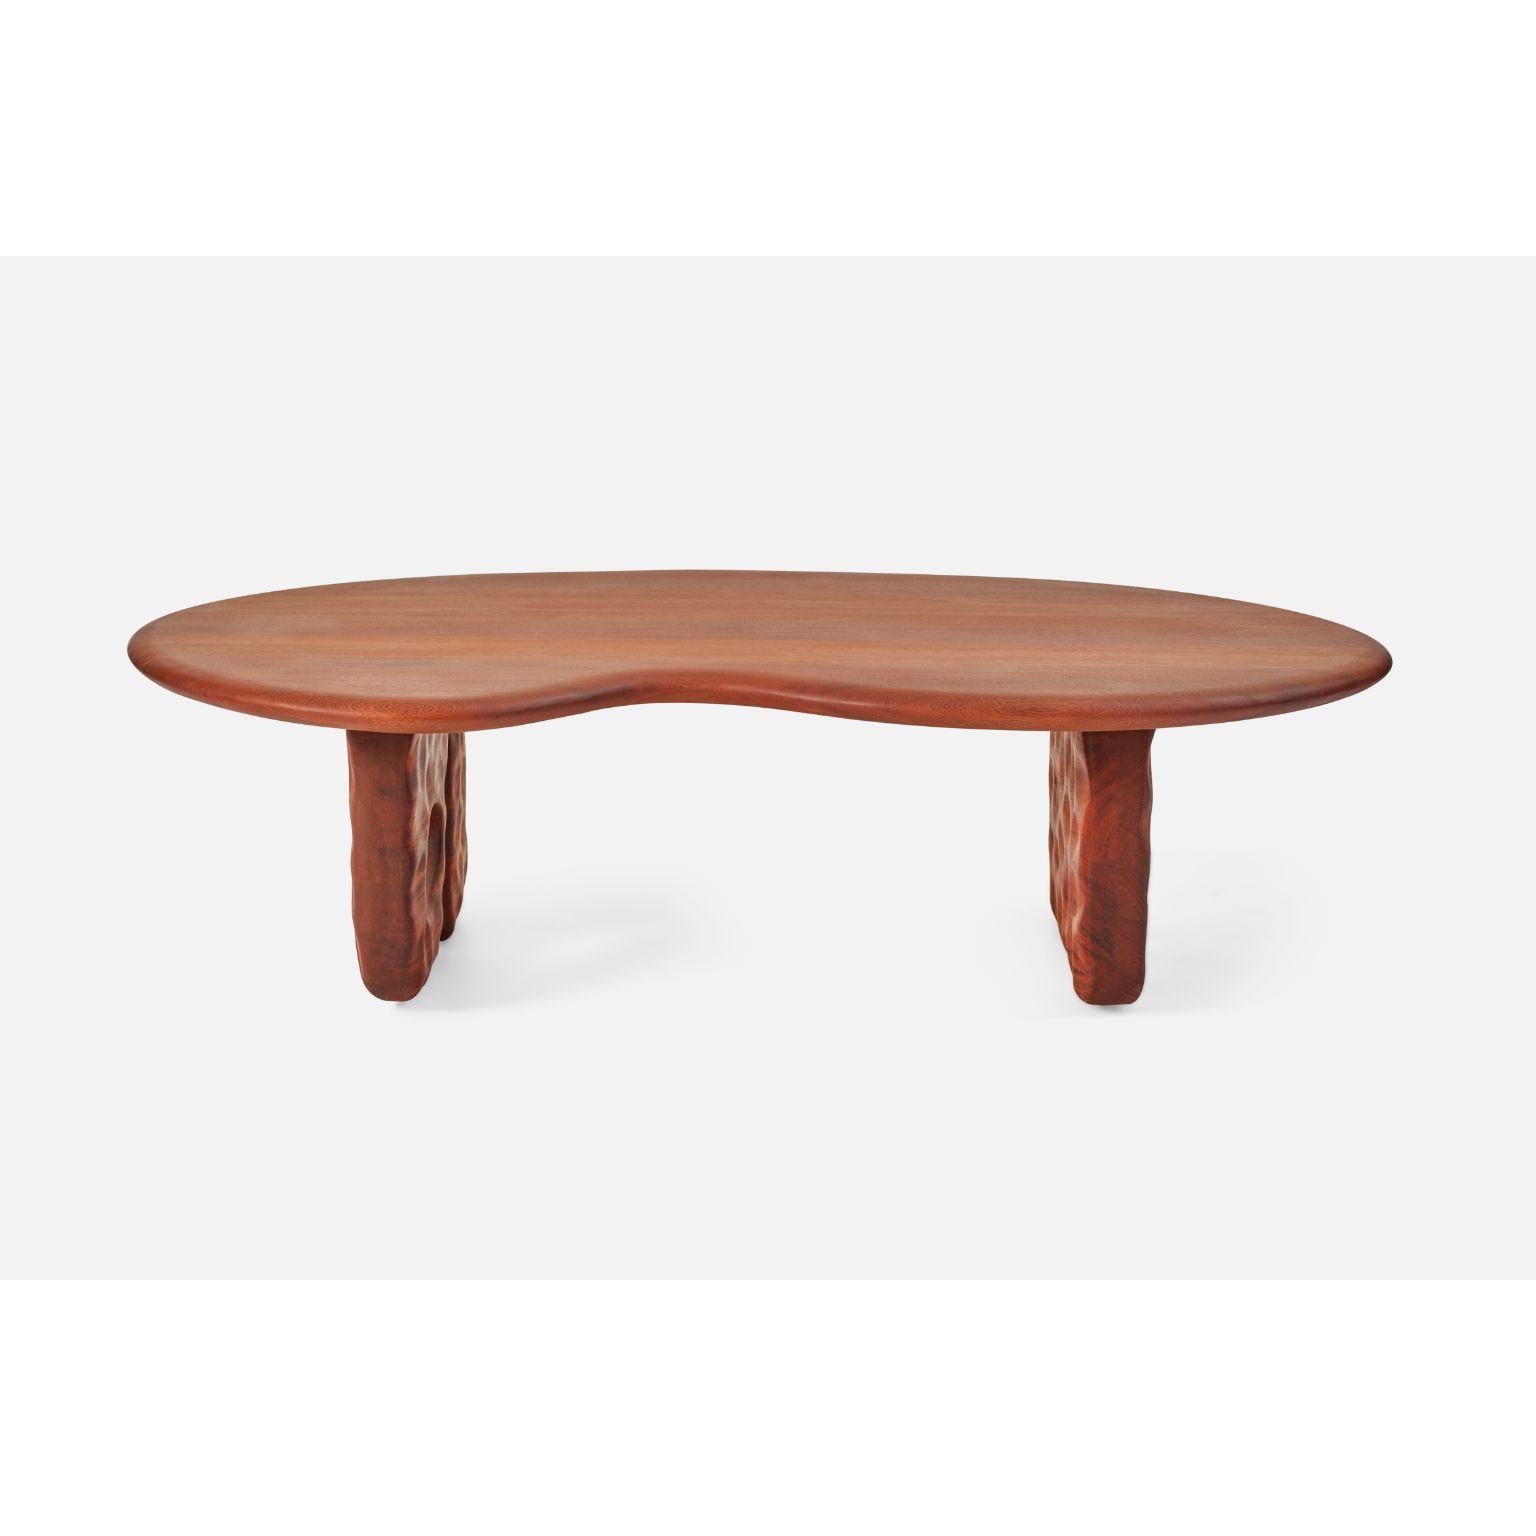 Avasin Low Table by Contemporary Ecowood
Dimensions: W 84 x D 150 x H 41 cm.
Materials: Exotic Hardwood.
Color: Natural.

Contemporary Ecowood’s story began in a craft workshop in 2009. Our wood passion made us focus on fallen trees in the